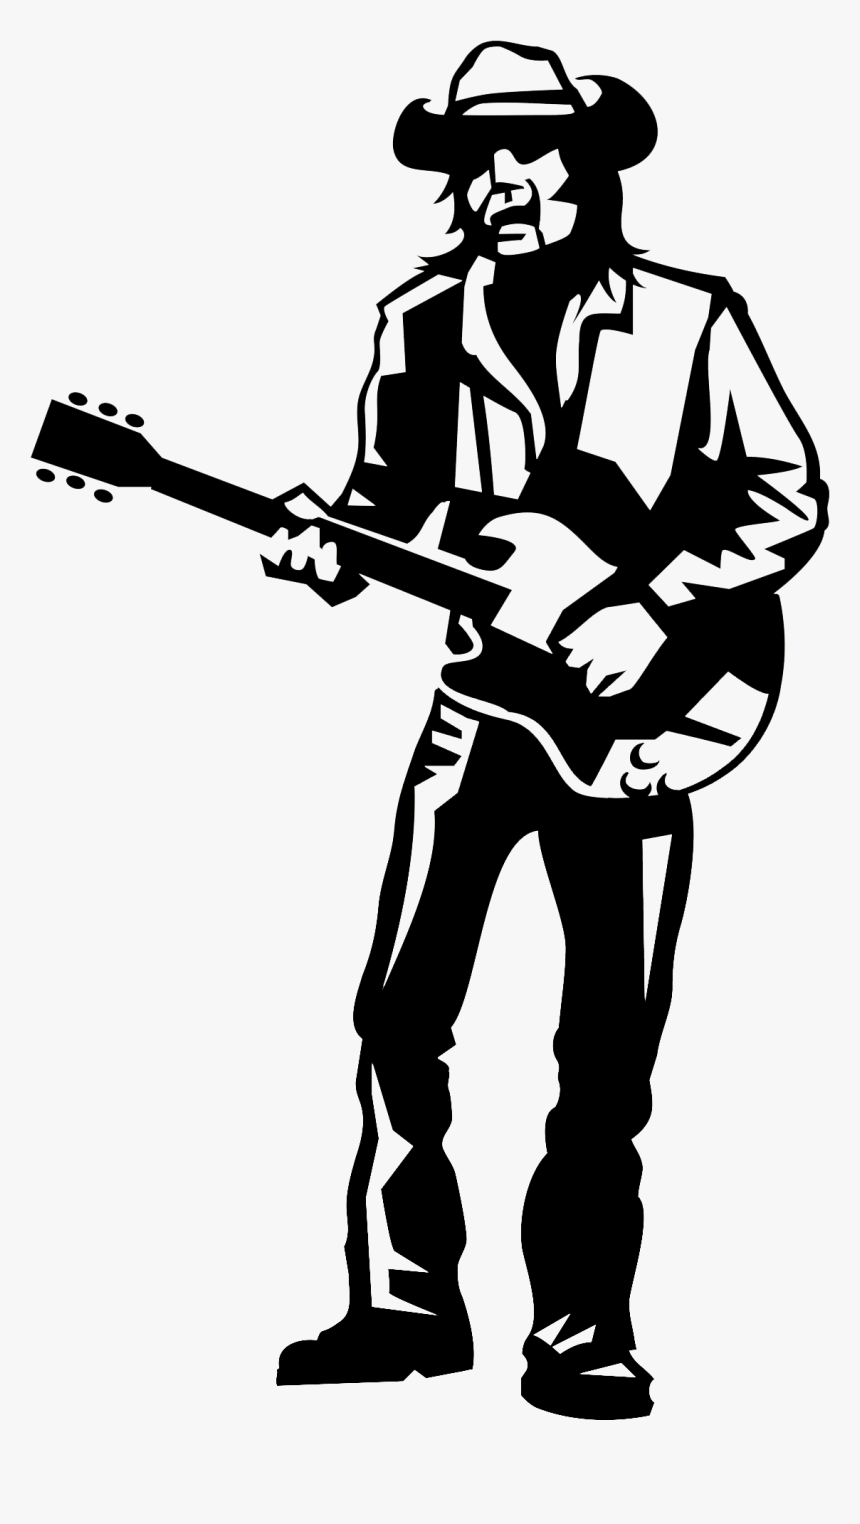 Guitarist Musician Silhouette - Man With Guitar Silhouette, HD Png Download, Free Download